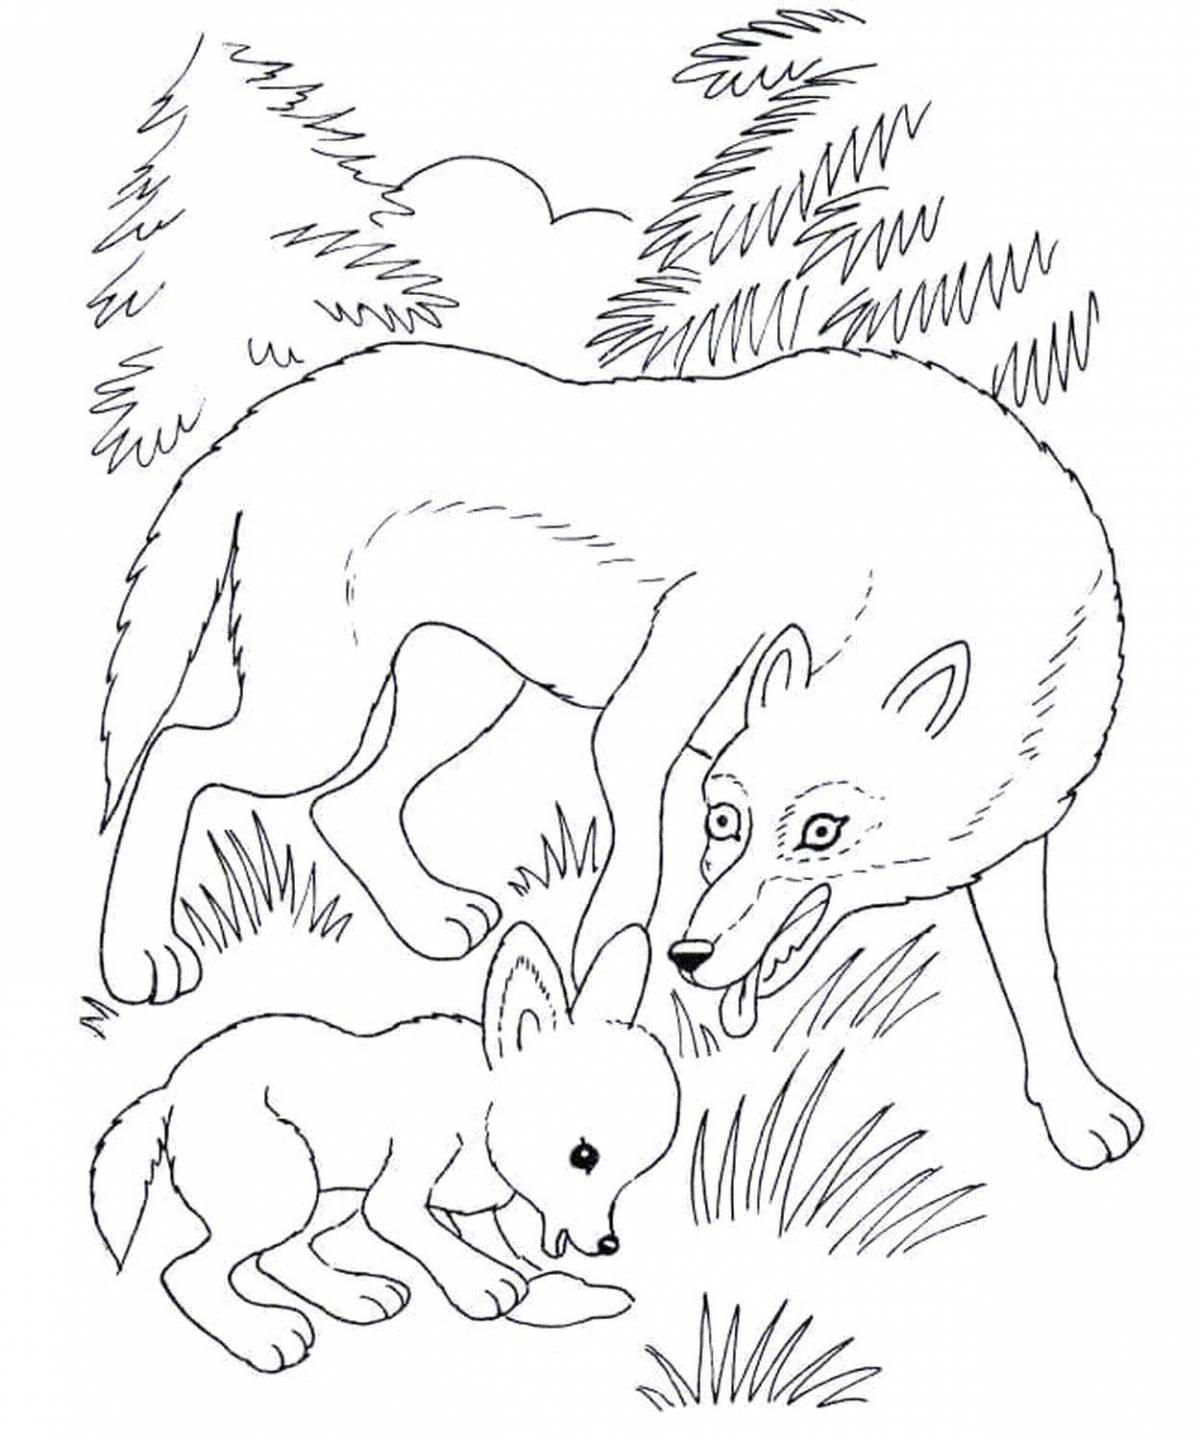 Playful wild animal coloring page